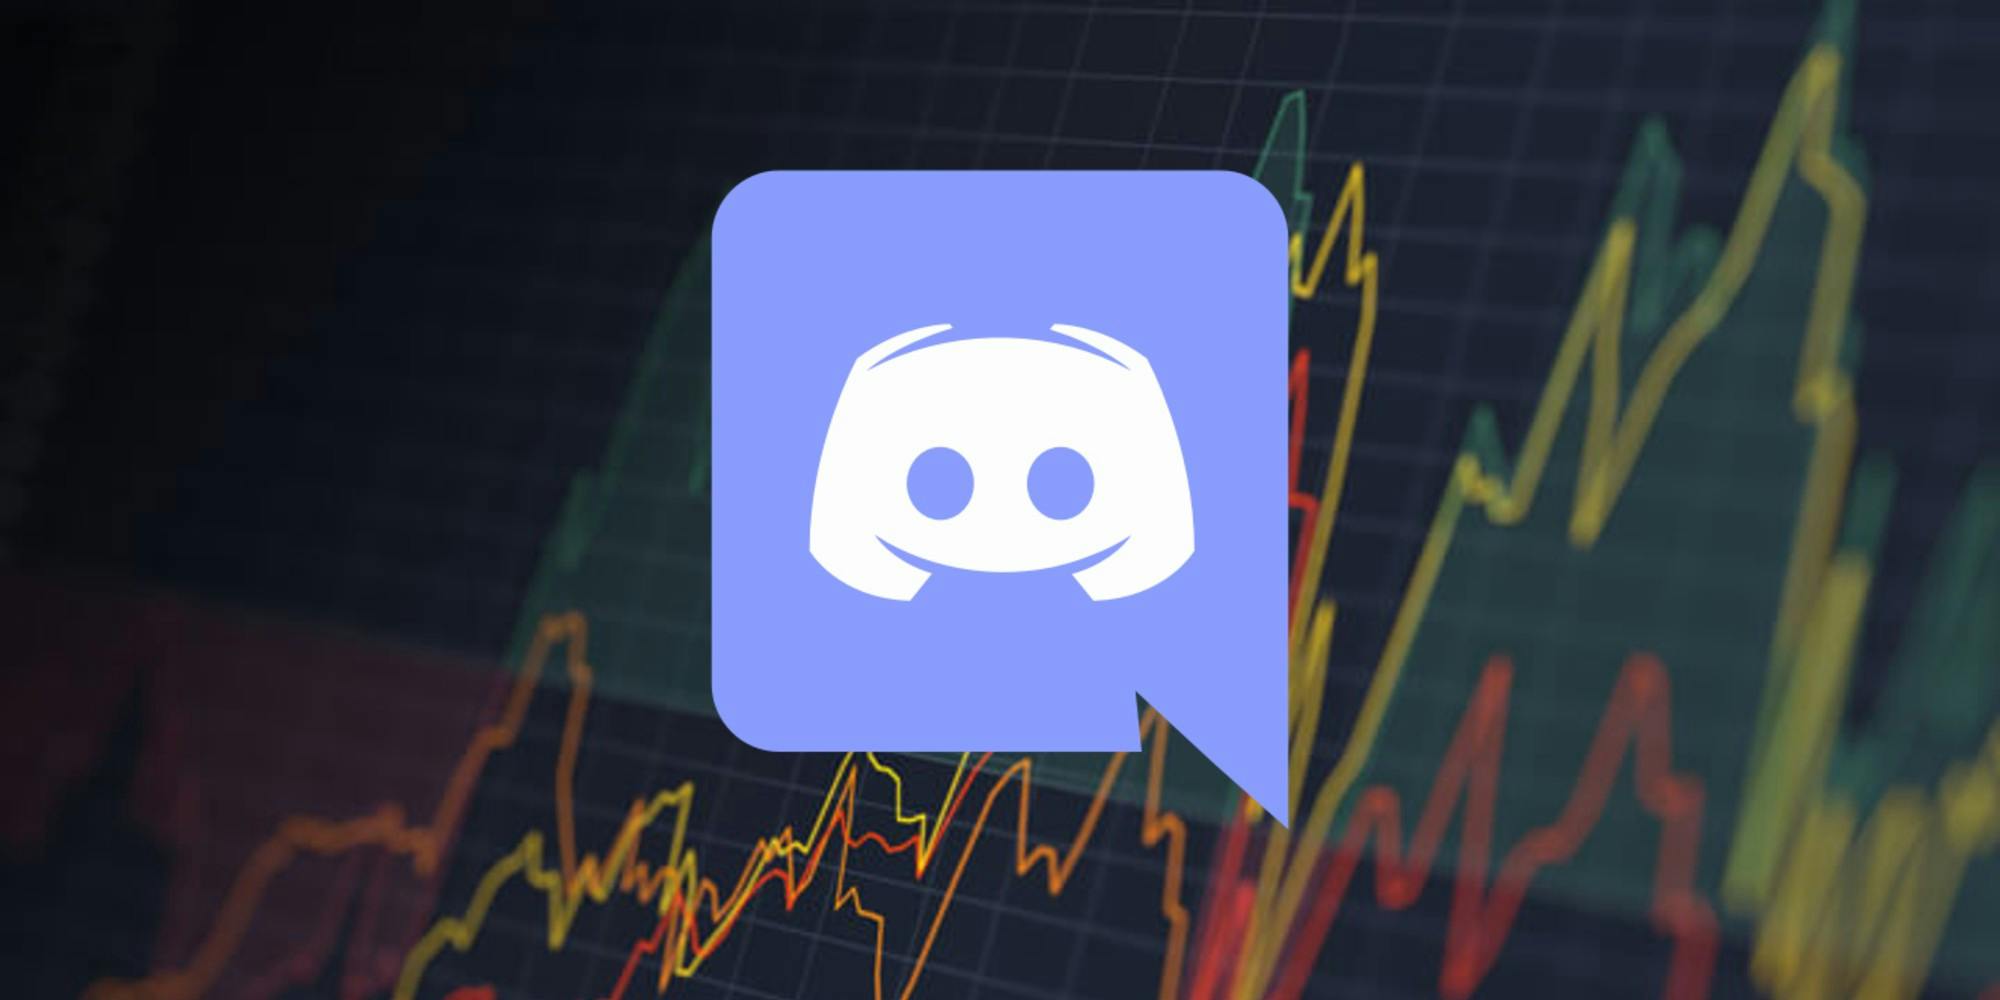 The Discord logo over a stock chart